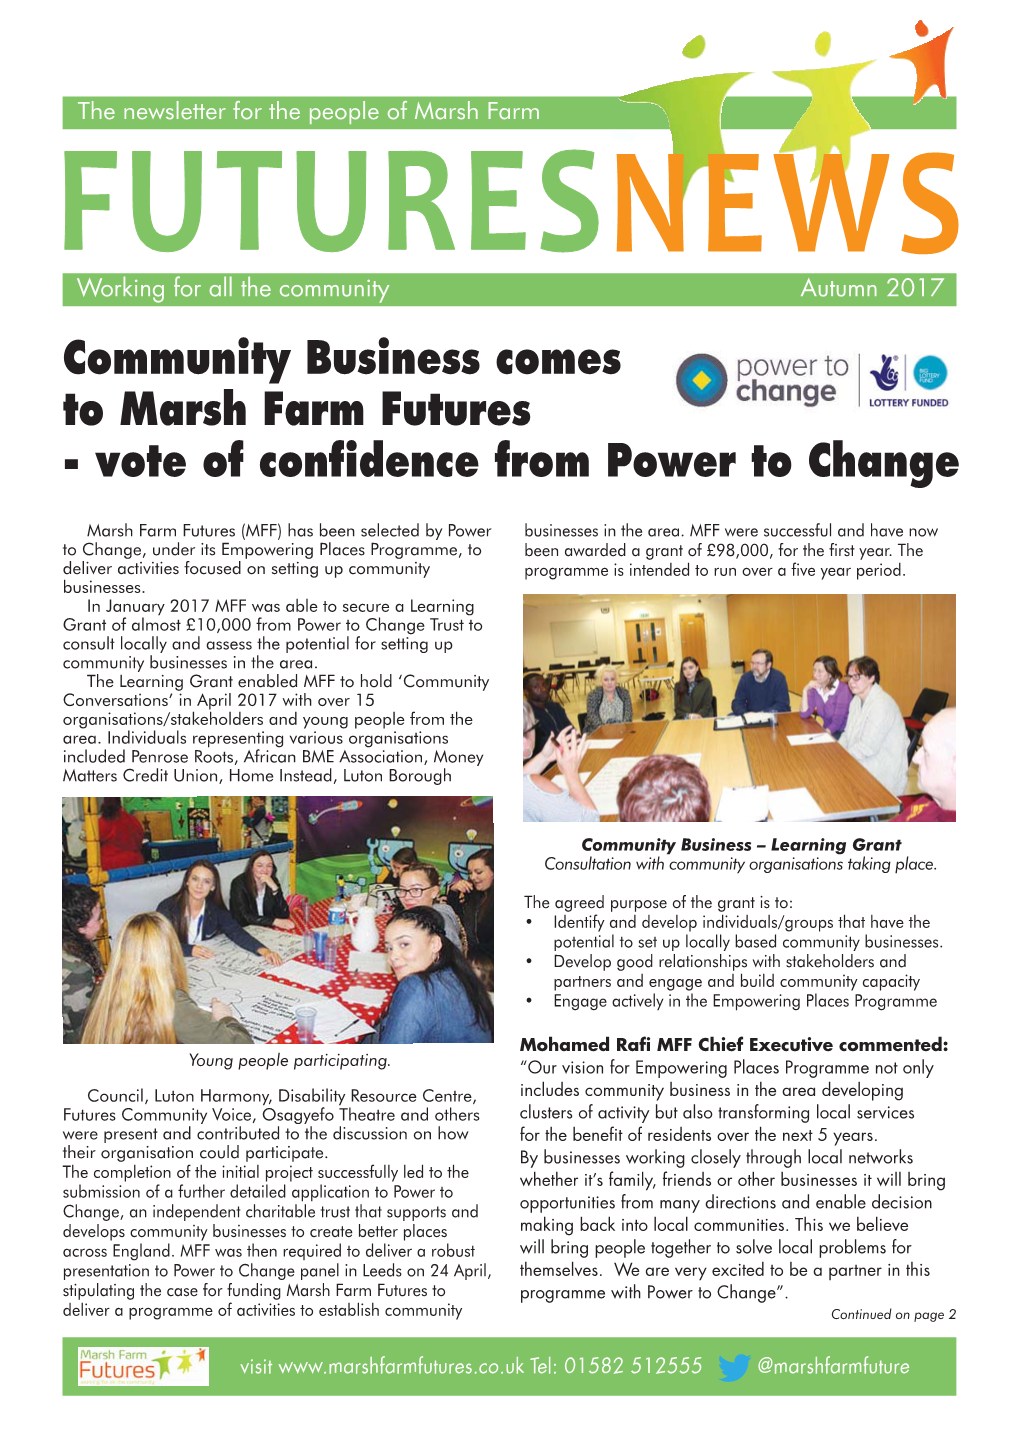 Community Business Comes to Marsh Farm Futures - Vote of Confidence from Power to Change